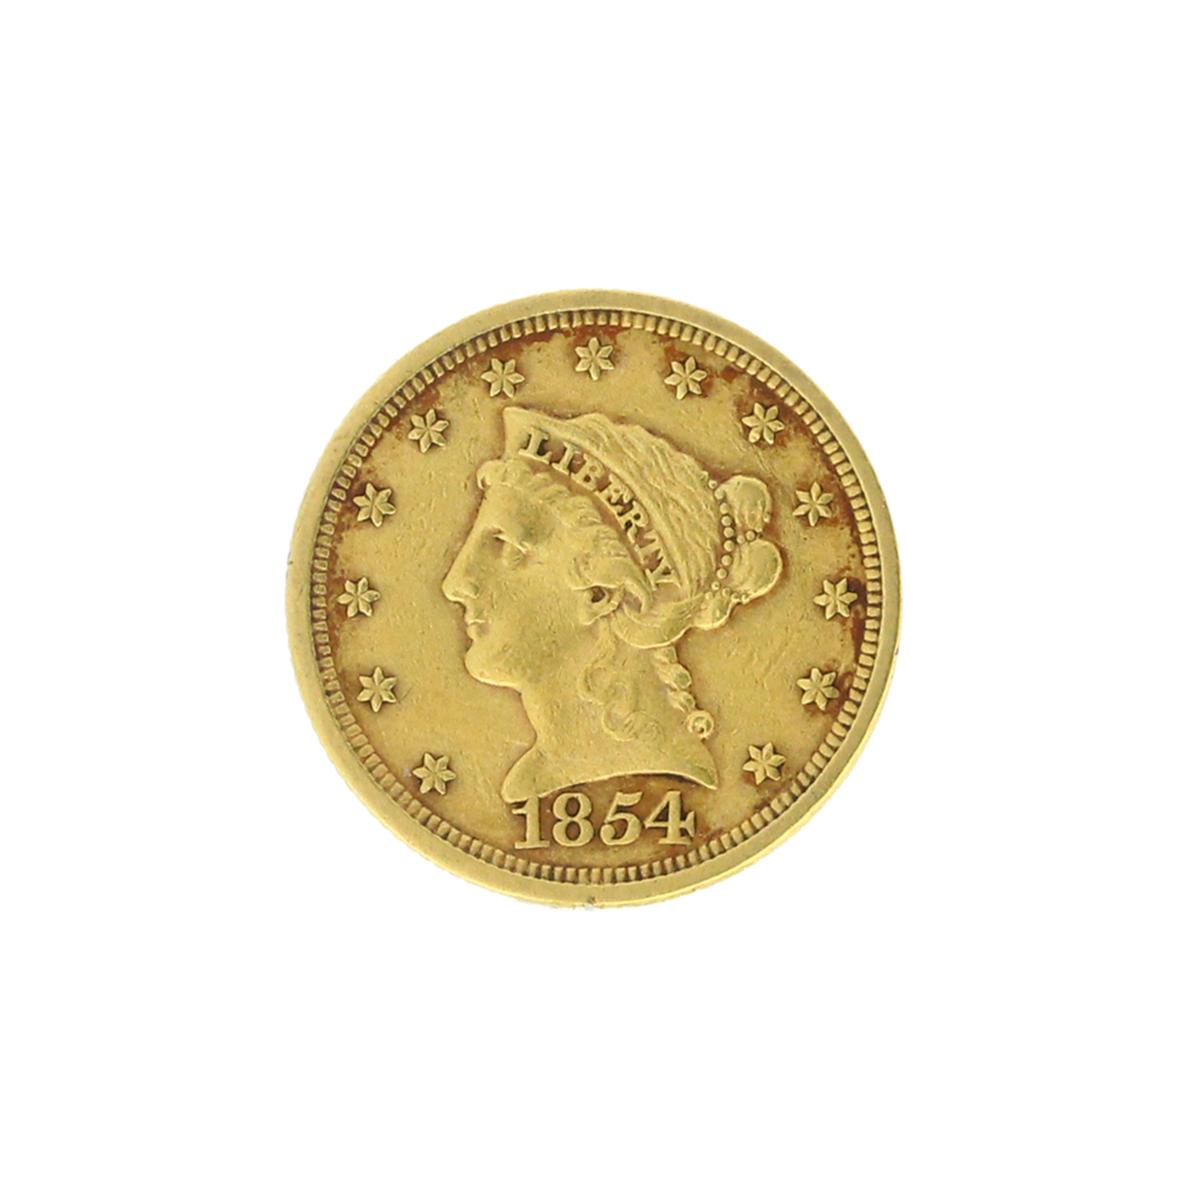 Rare 1854 $2.50 Liberty Head Gold Coin Great Investment